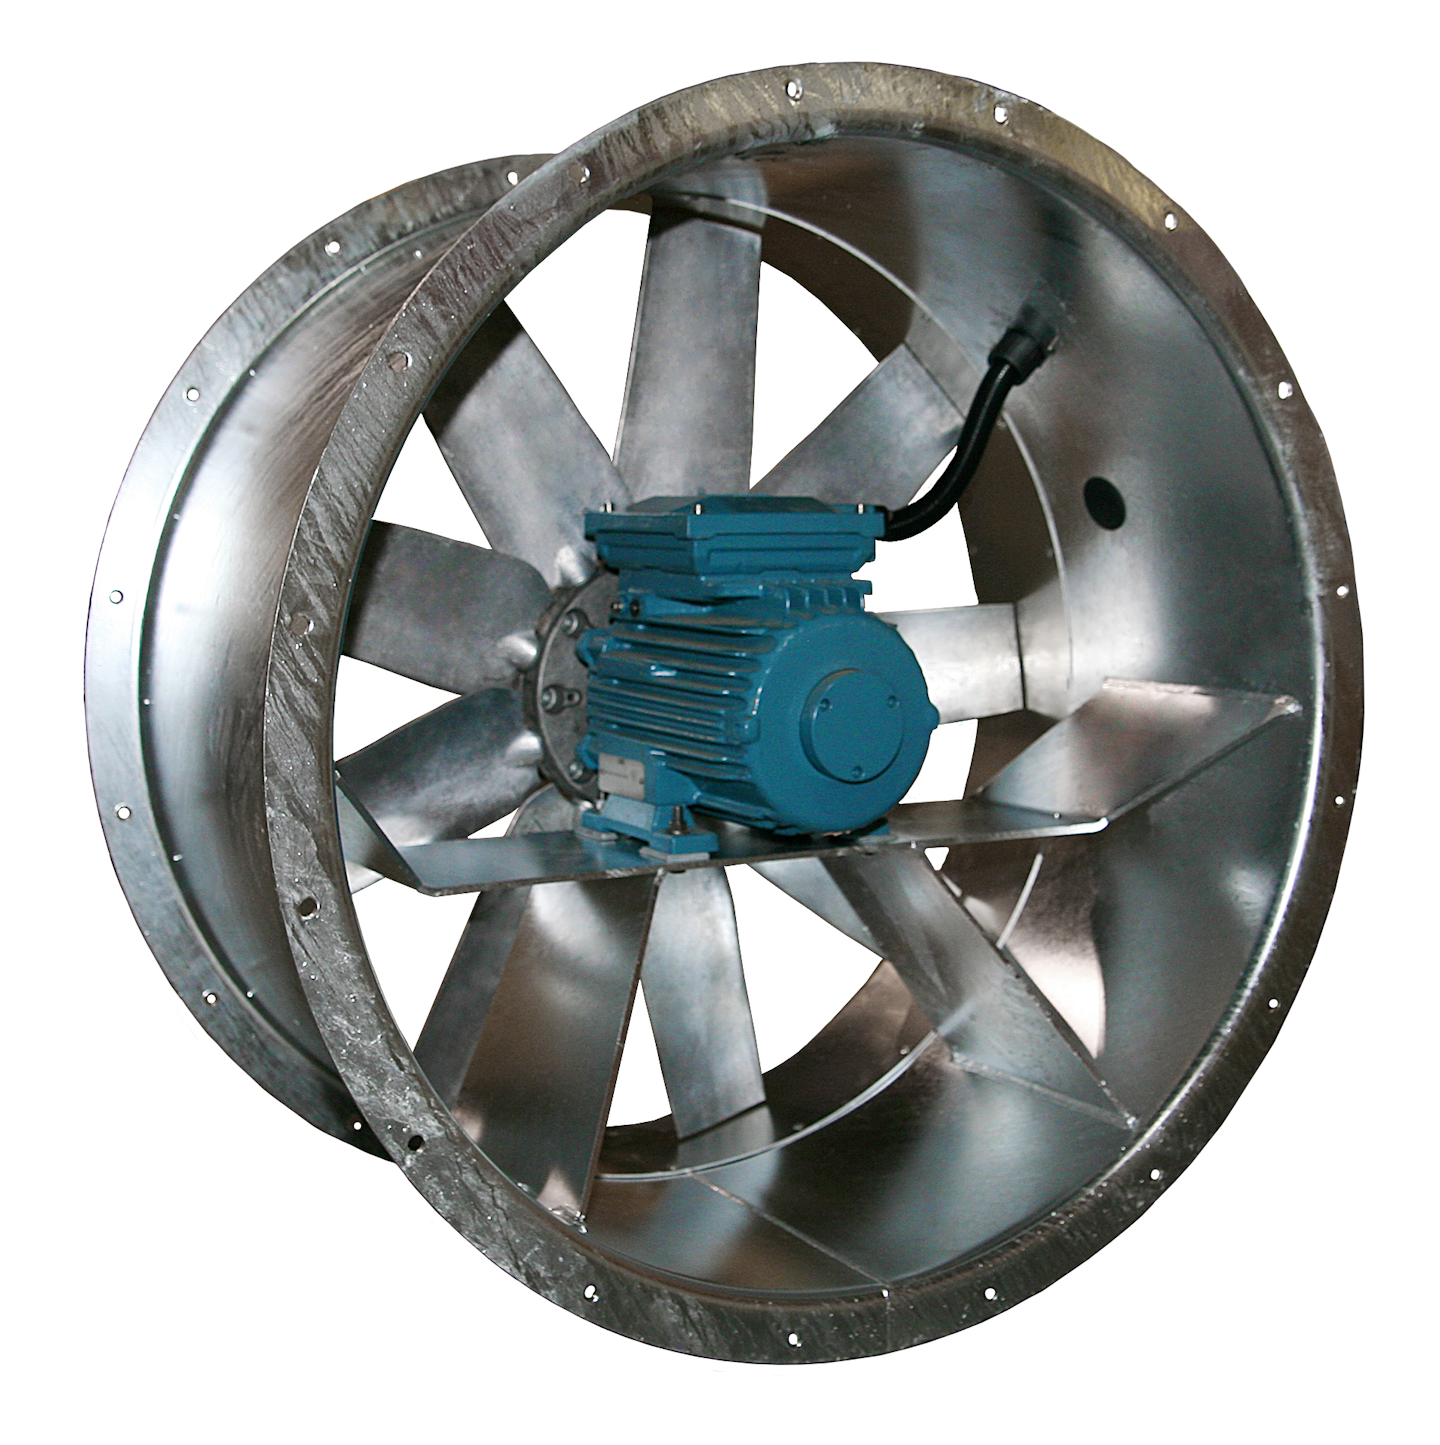 Howden American Fan Company Announces Durable And Corrosion Resistant Fans For Commercial Marine And Off Shore Applications Manufacturingnet